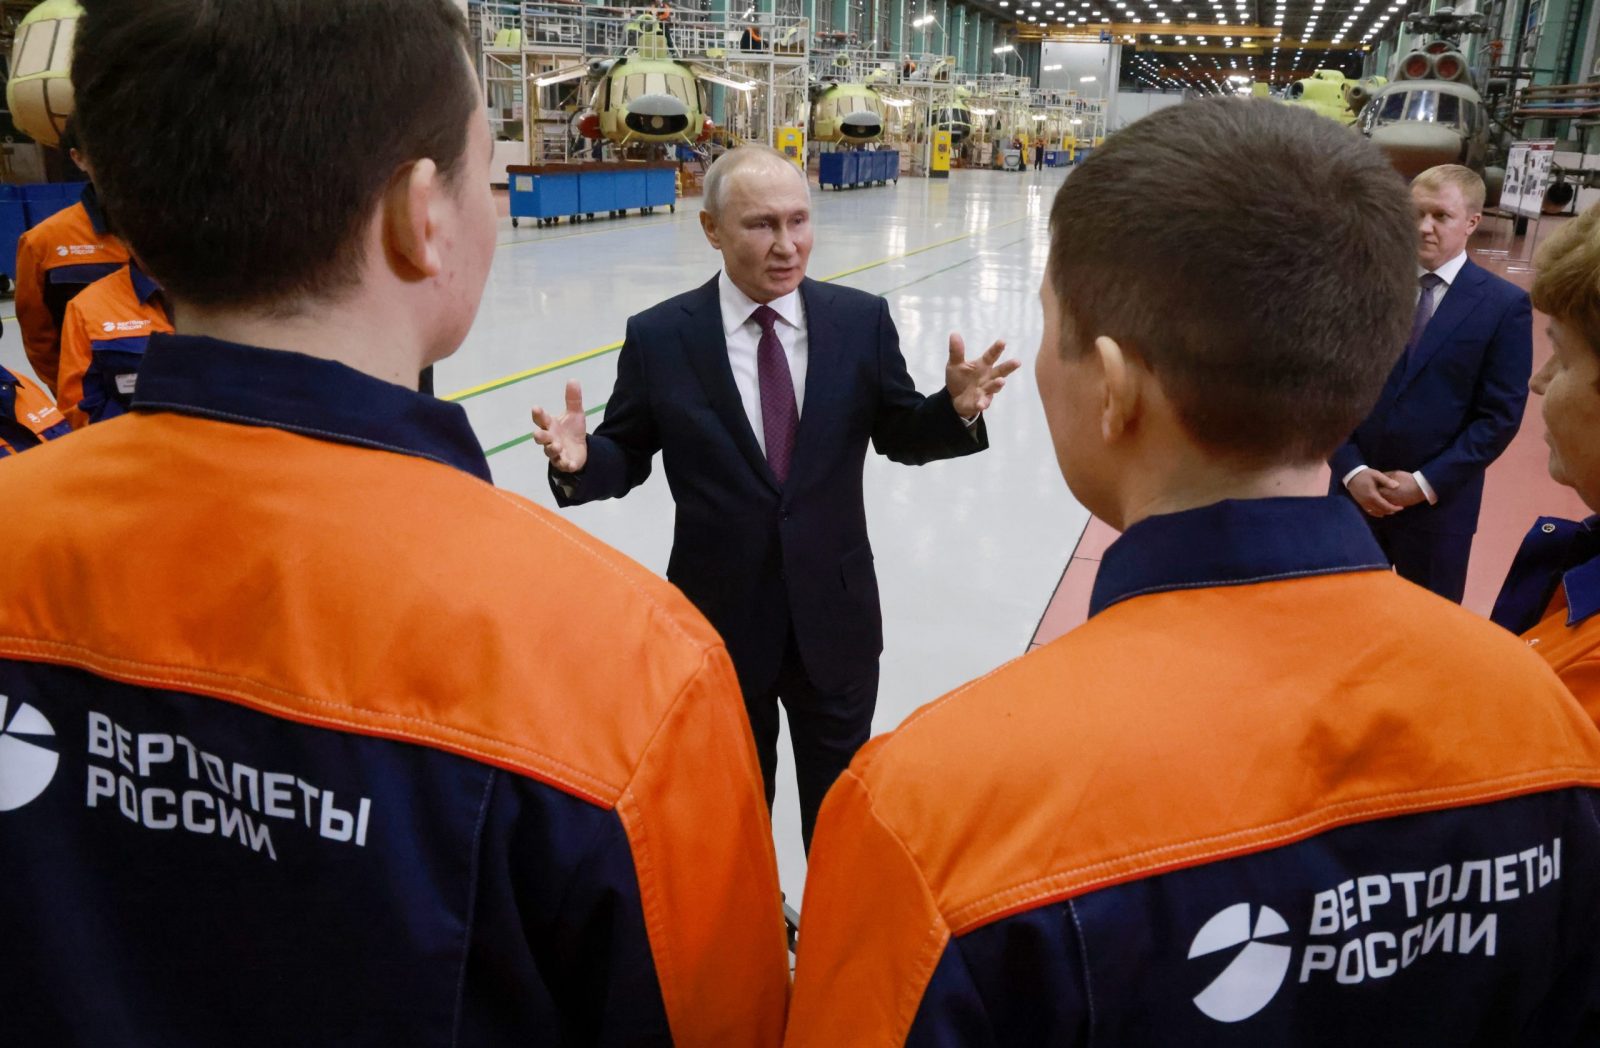 epa10522551 Russian President Vladimir Putin meets with staff members during his visit to the Ulan-Ude Aviation Plant, part of the Rostec's Russian Helicopters manufacturing company, in Ulan-Ude, the Republic of Buryatia, Russia, 14 March 2023. Putin is on a working trip to Buryatia, where he visited the Ulan-Ude Aviation Plant, one of Russia's leading helicopter manufacturers.  EPA/VLADIMIR GERDO /SPUTNIK/KREMLIN / POOL MANDATORY CREDIT